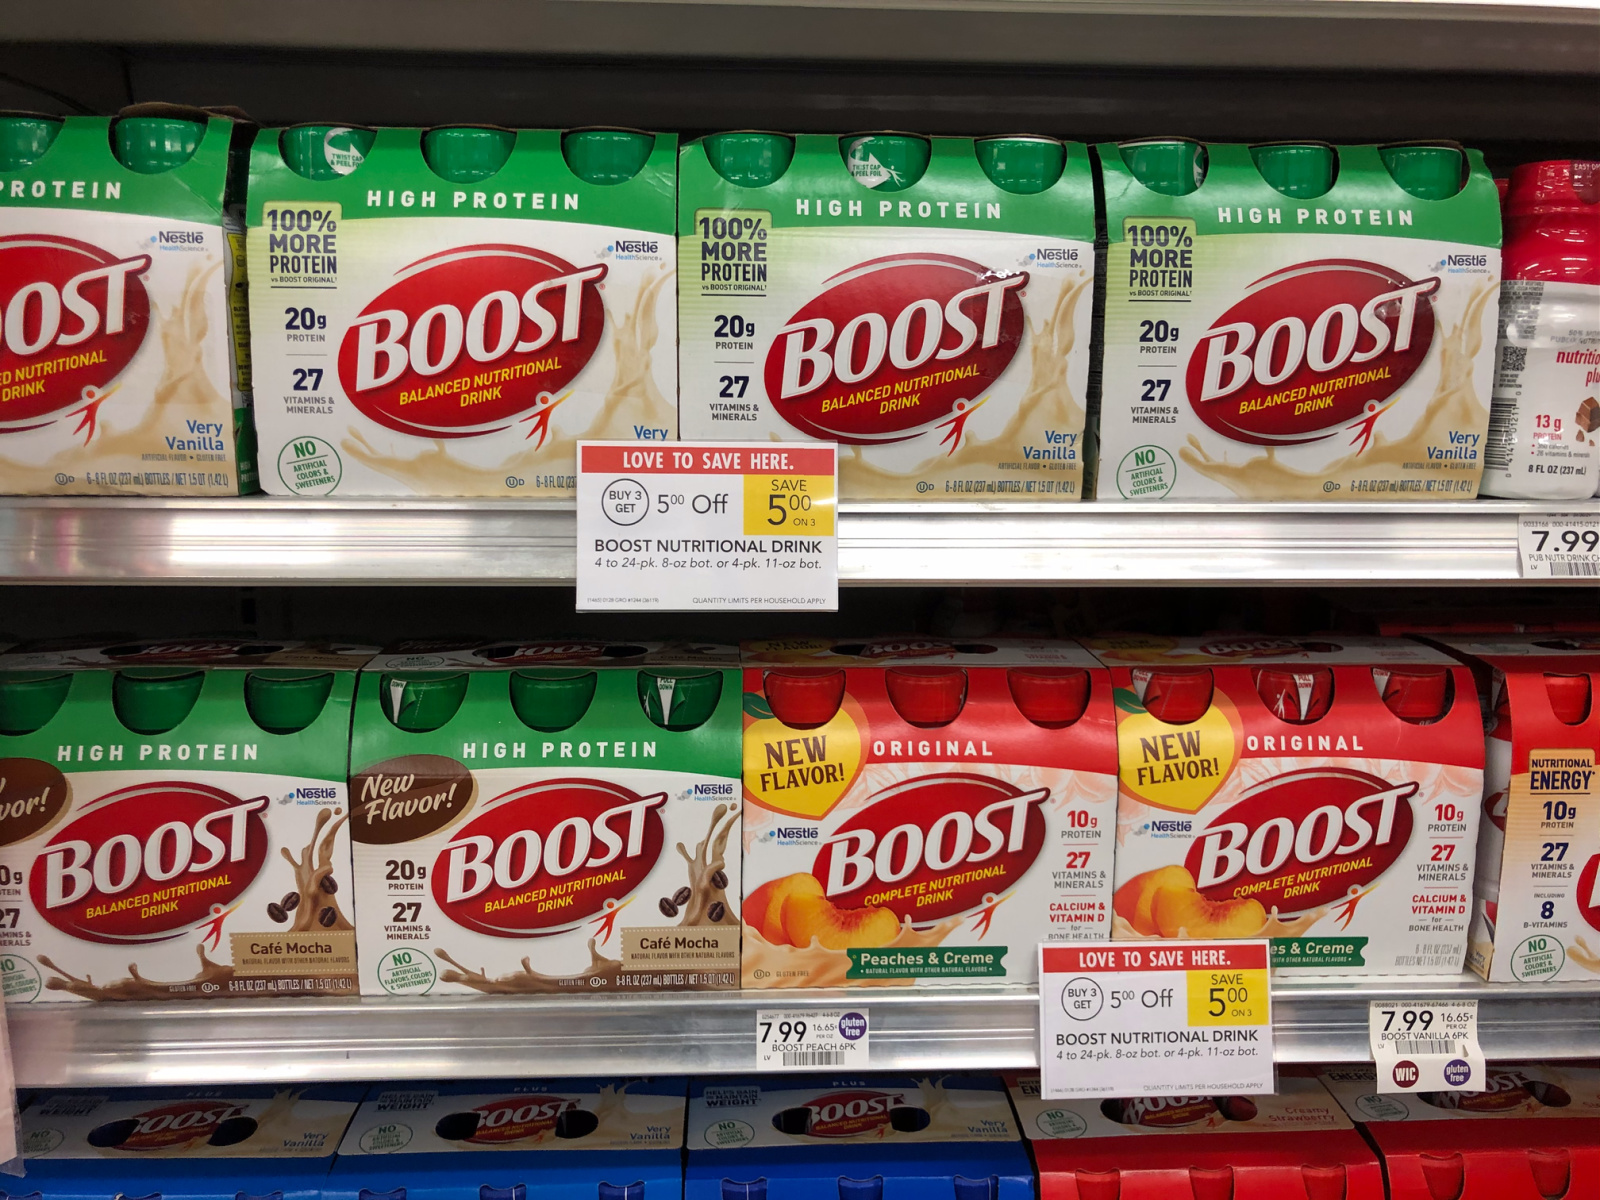 Start The New Year With Great Taste & Nutrition - Save BIG On BOOST® Nutritional Drinks At Publix on I Heart Publix